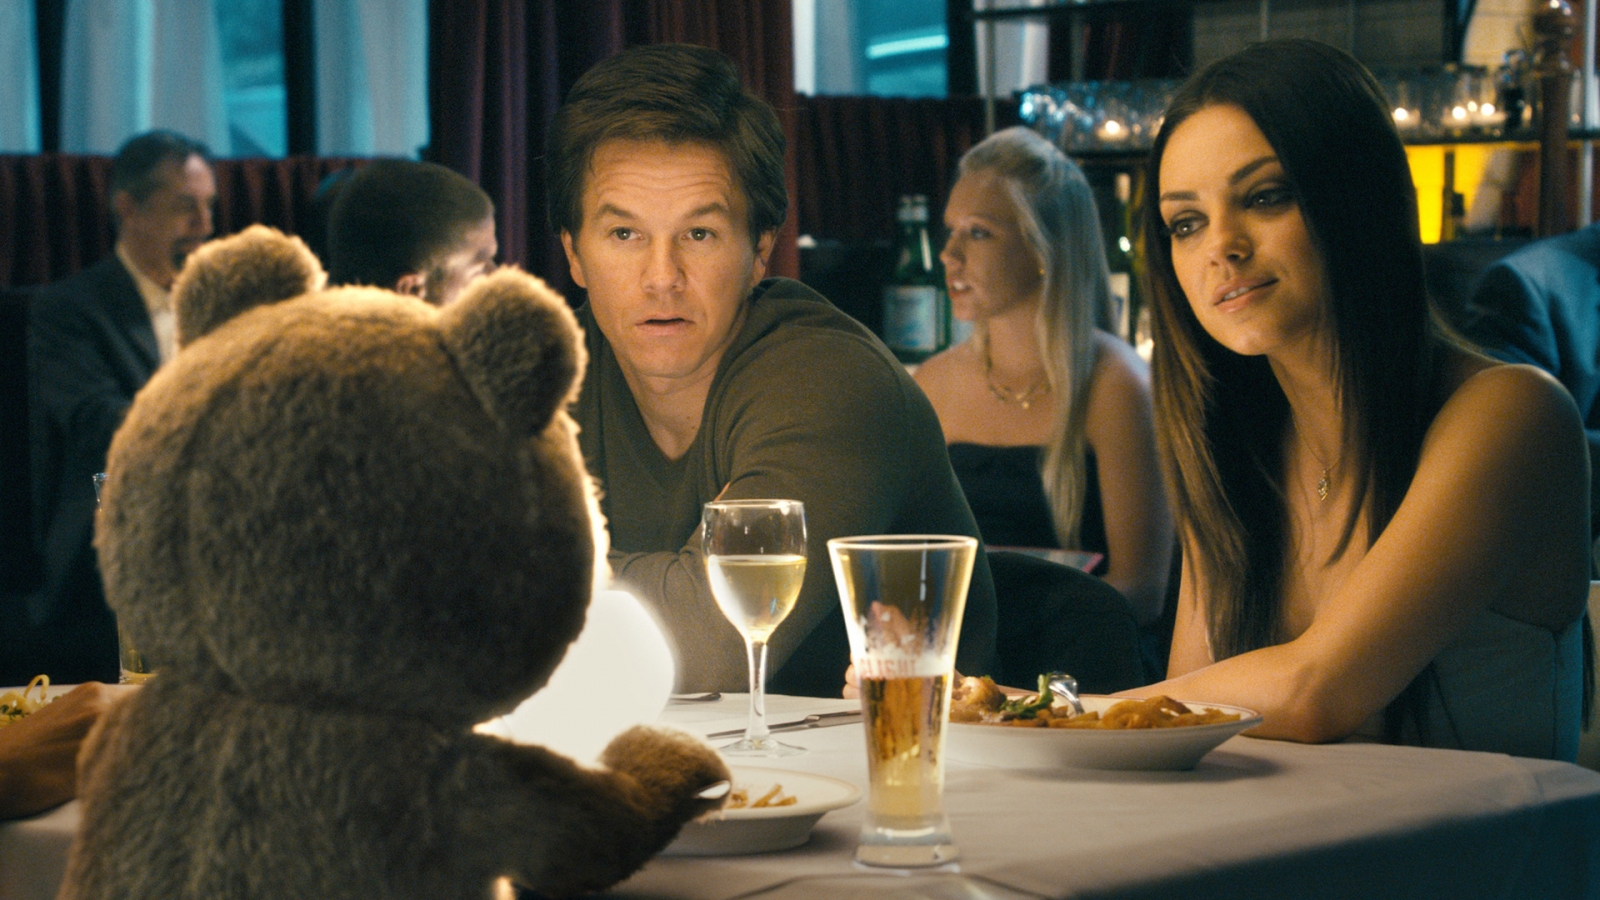 Ted Characters for 1600 x 900 HDTV resolution